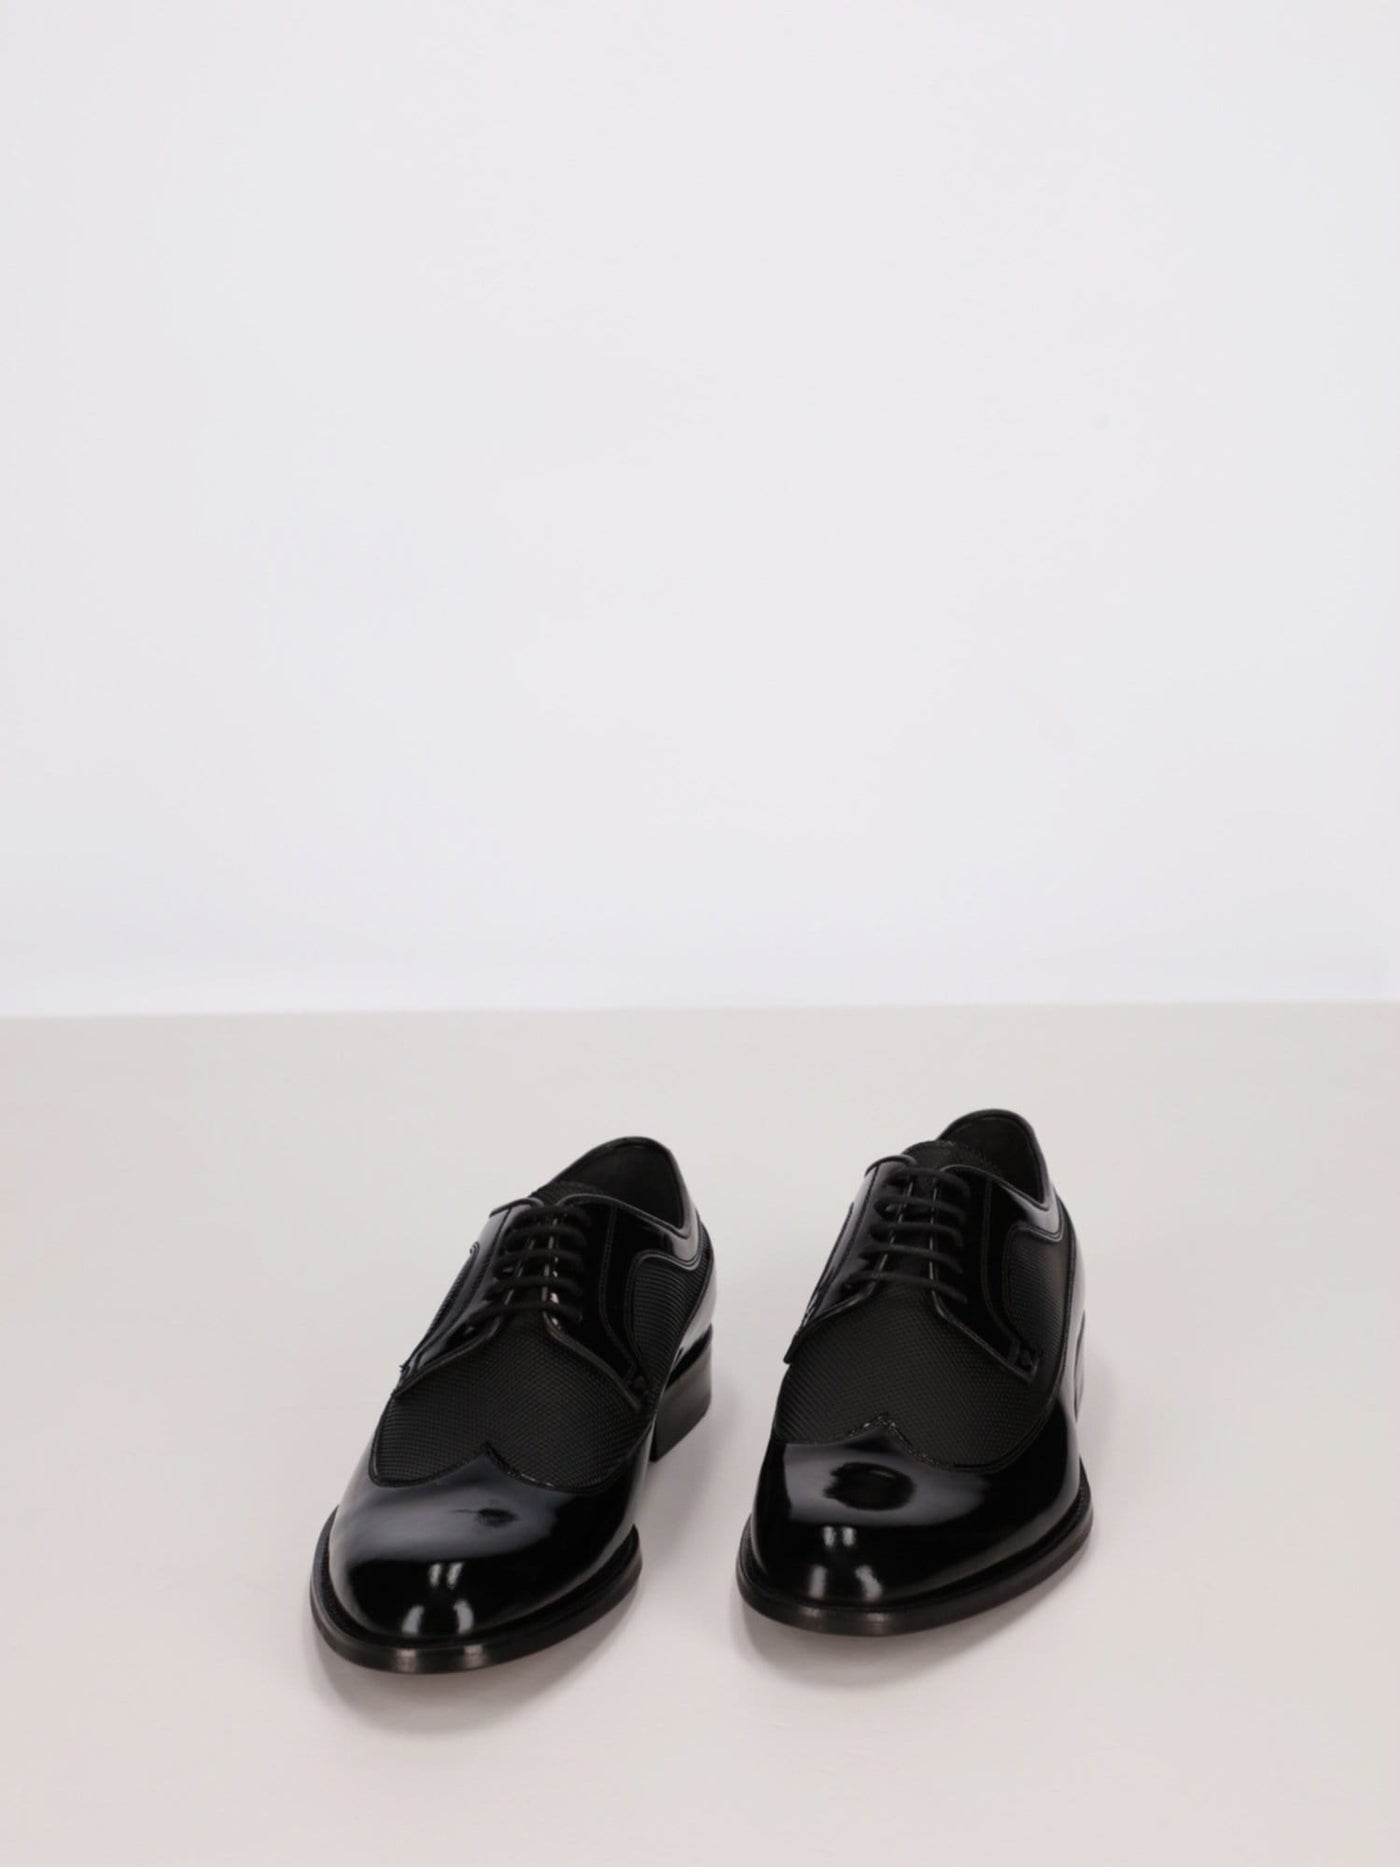 Daniel Hechter Shoes Brogue Oxford Balmoral Lace-Up Shoes